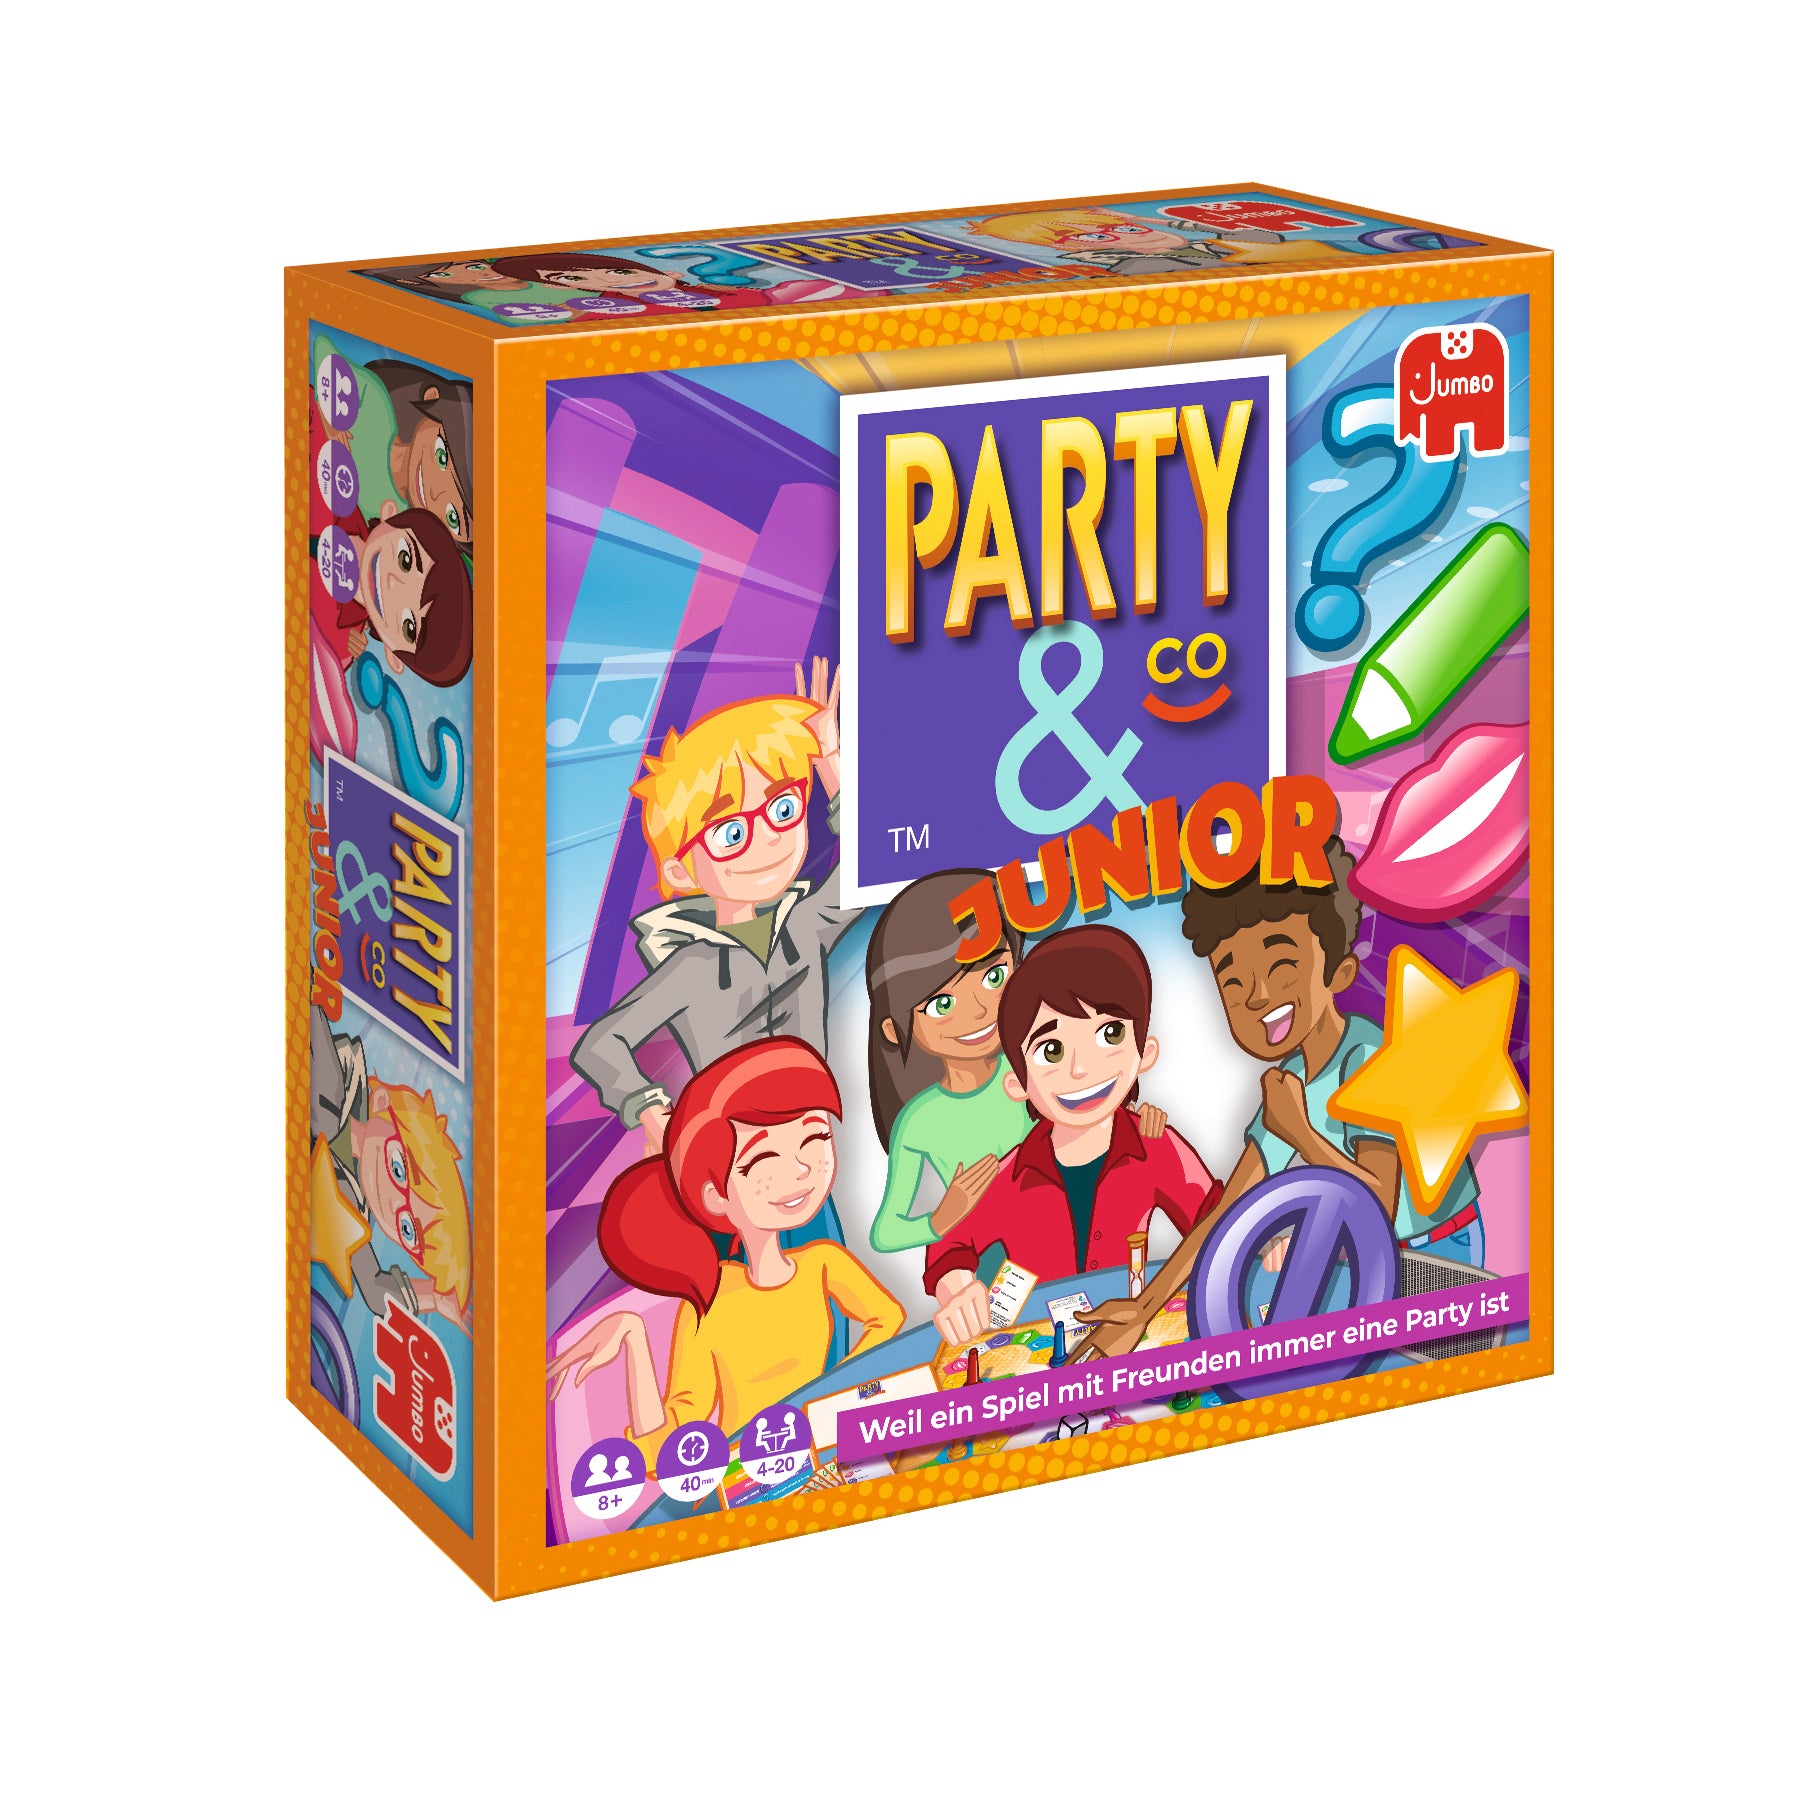 Party & Co. Junior - DACH - product image - Jumboplay.com